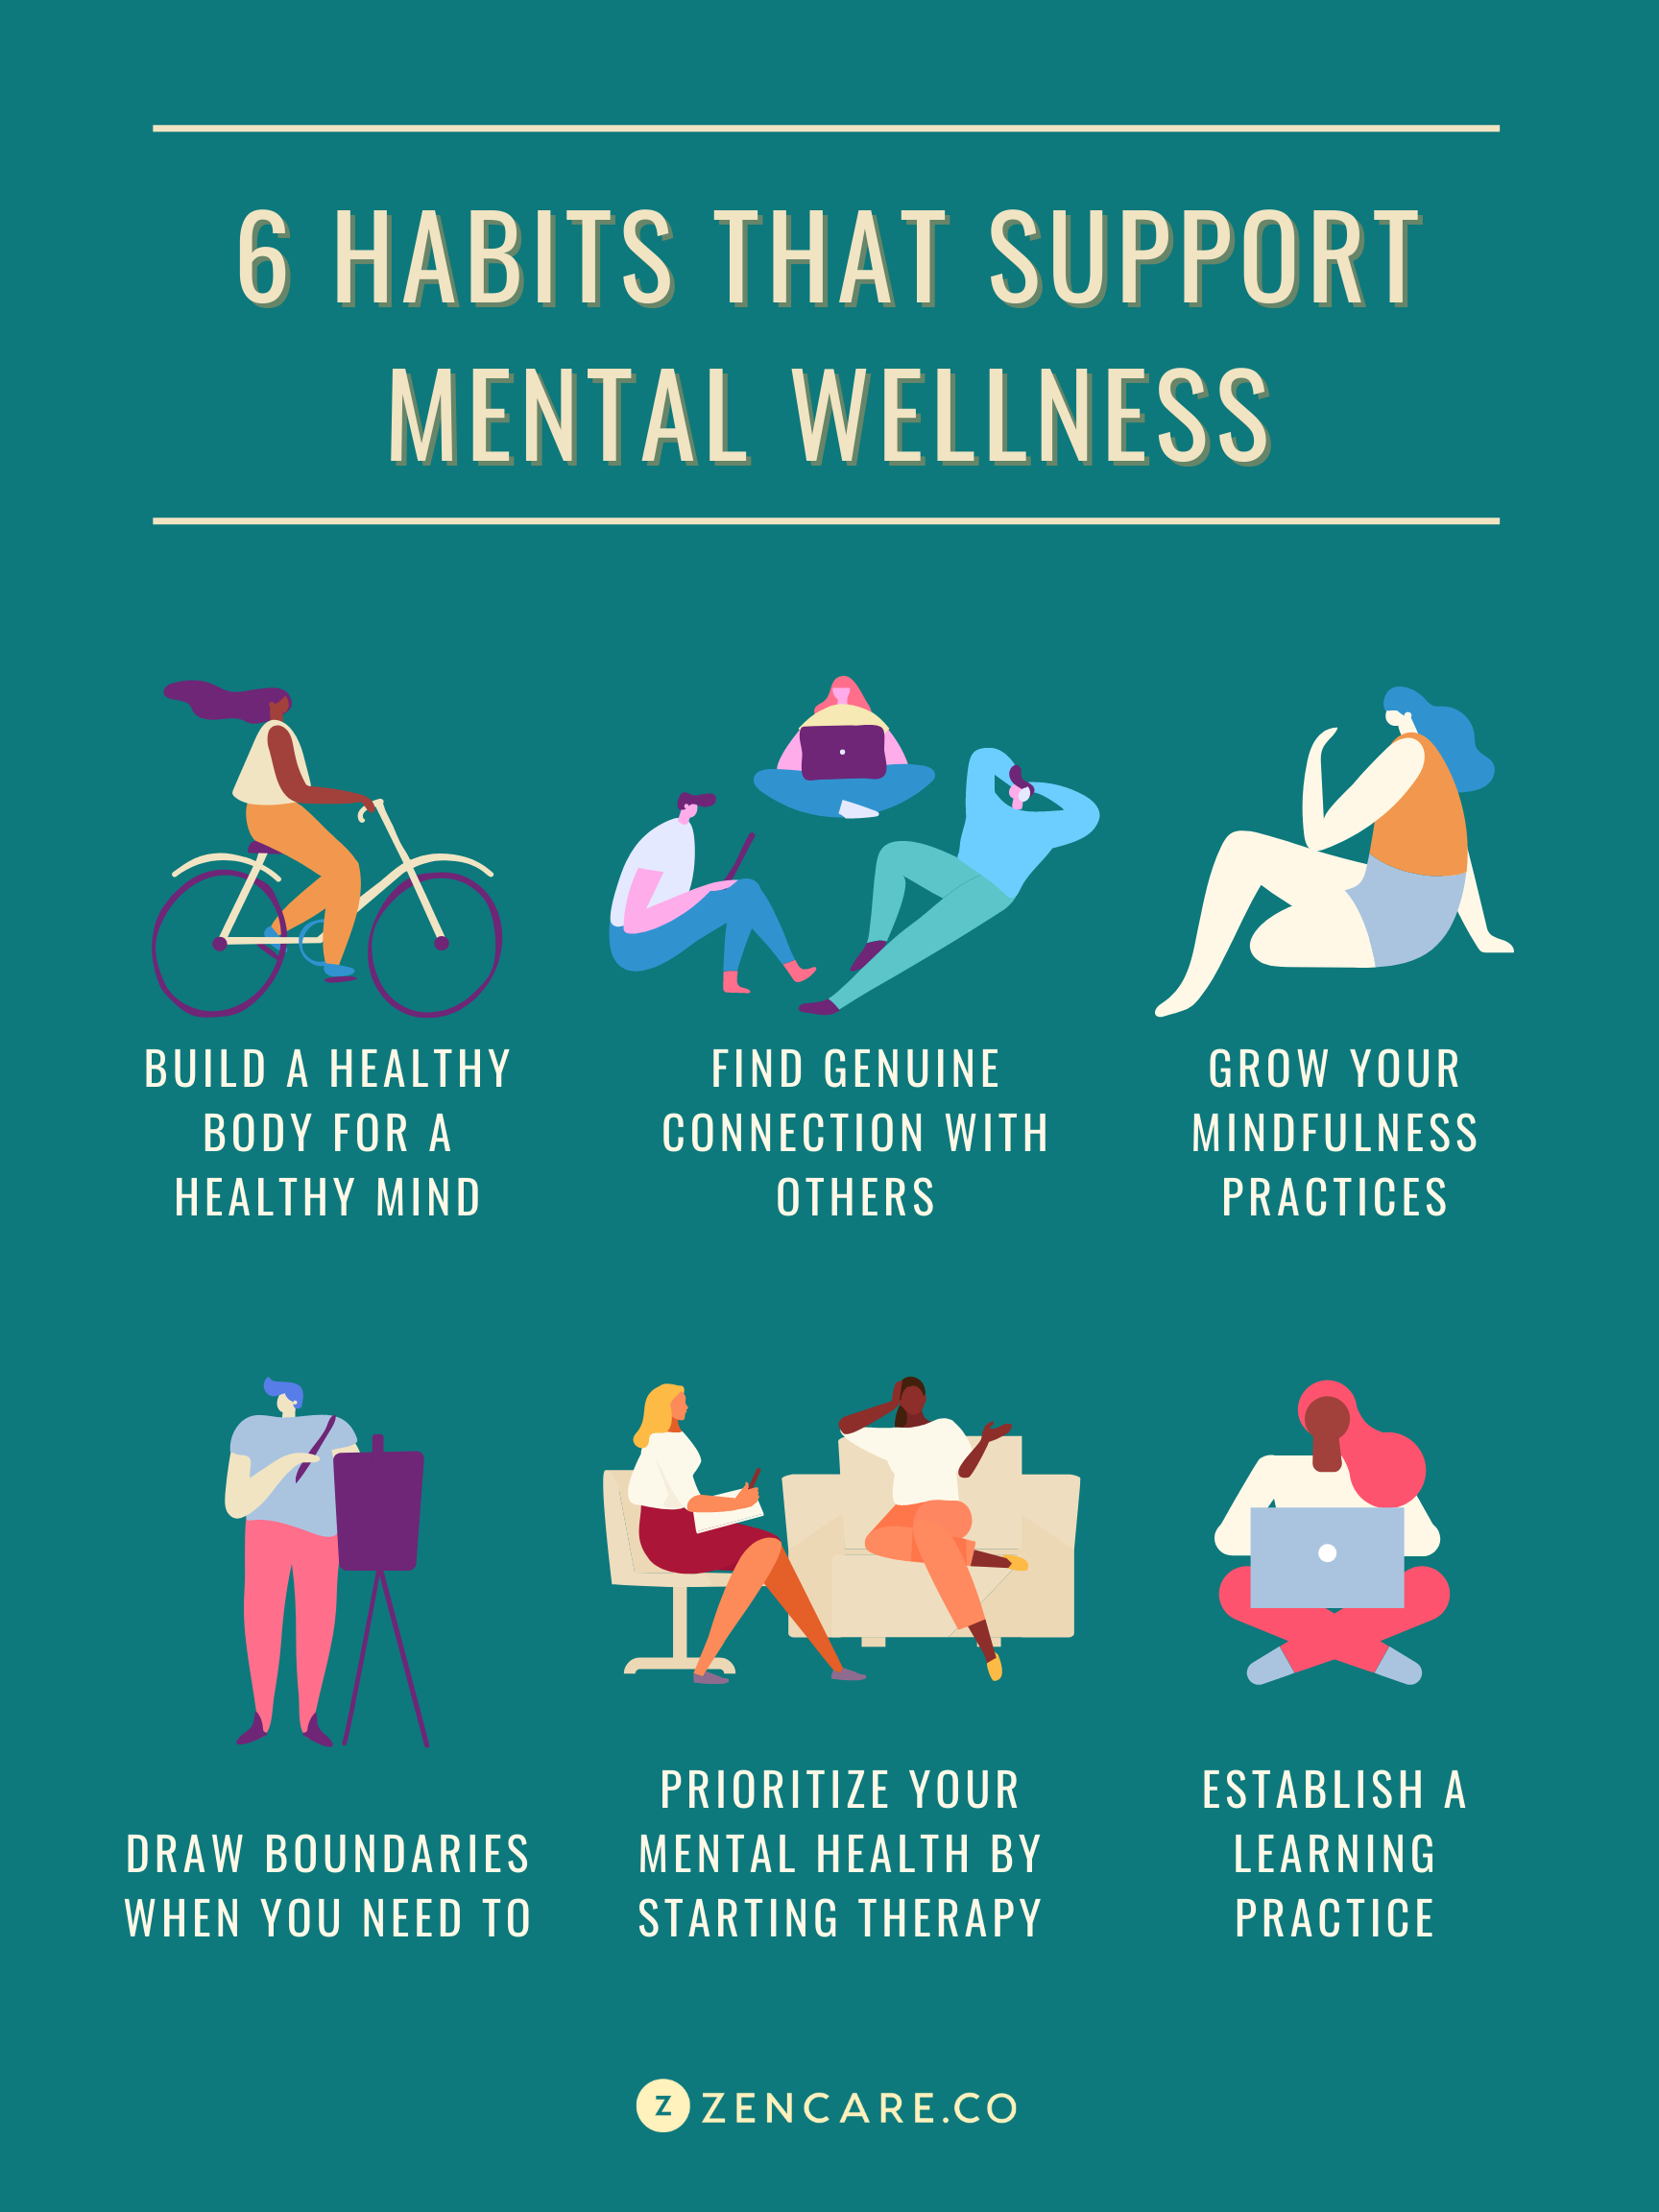 6 Habits that Support Mental Wellness